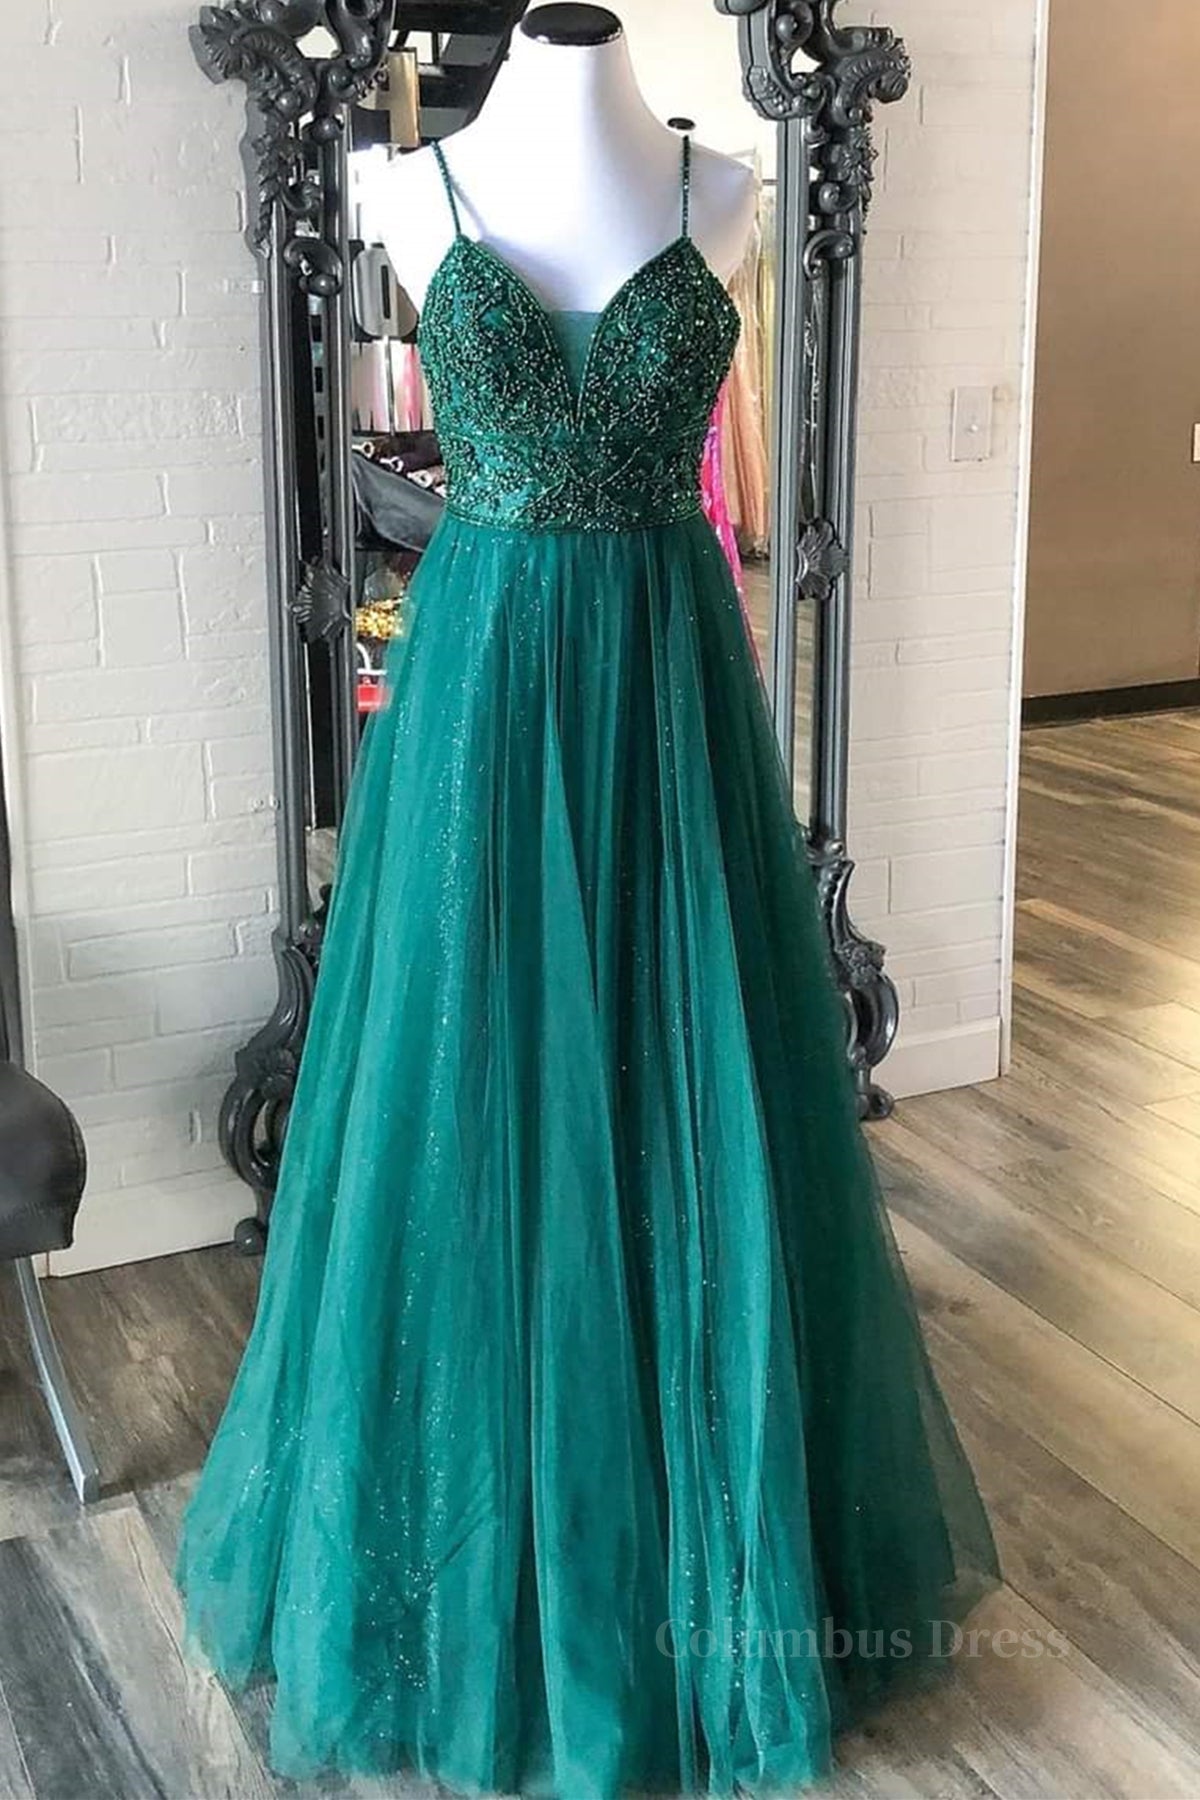 Shiny V Neck Backless Beaded Green Tulle Long Corset Prom Dress, Green Lace Corset Formal Dress, Beaded Evening Dress outfit, Bridesmaids Dress Affordable